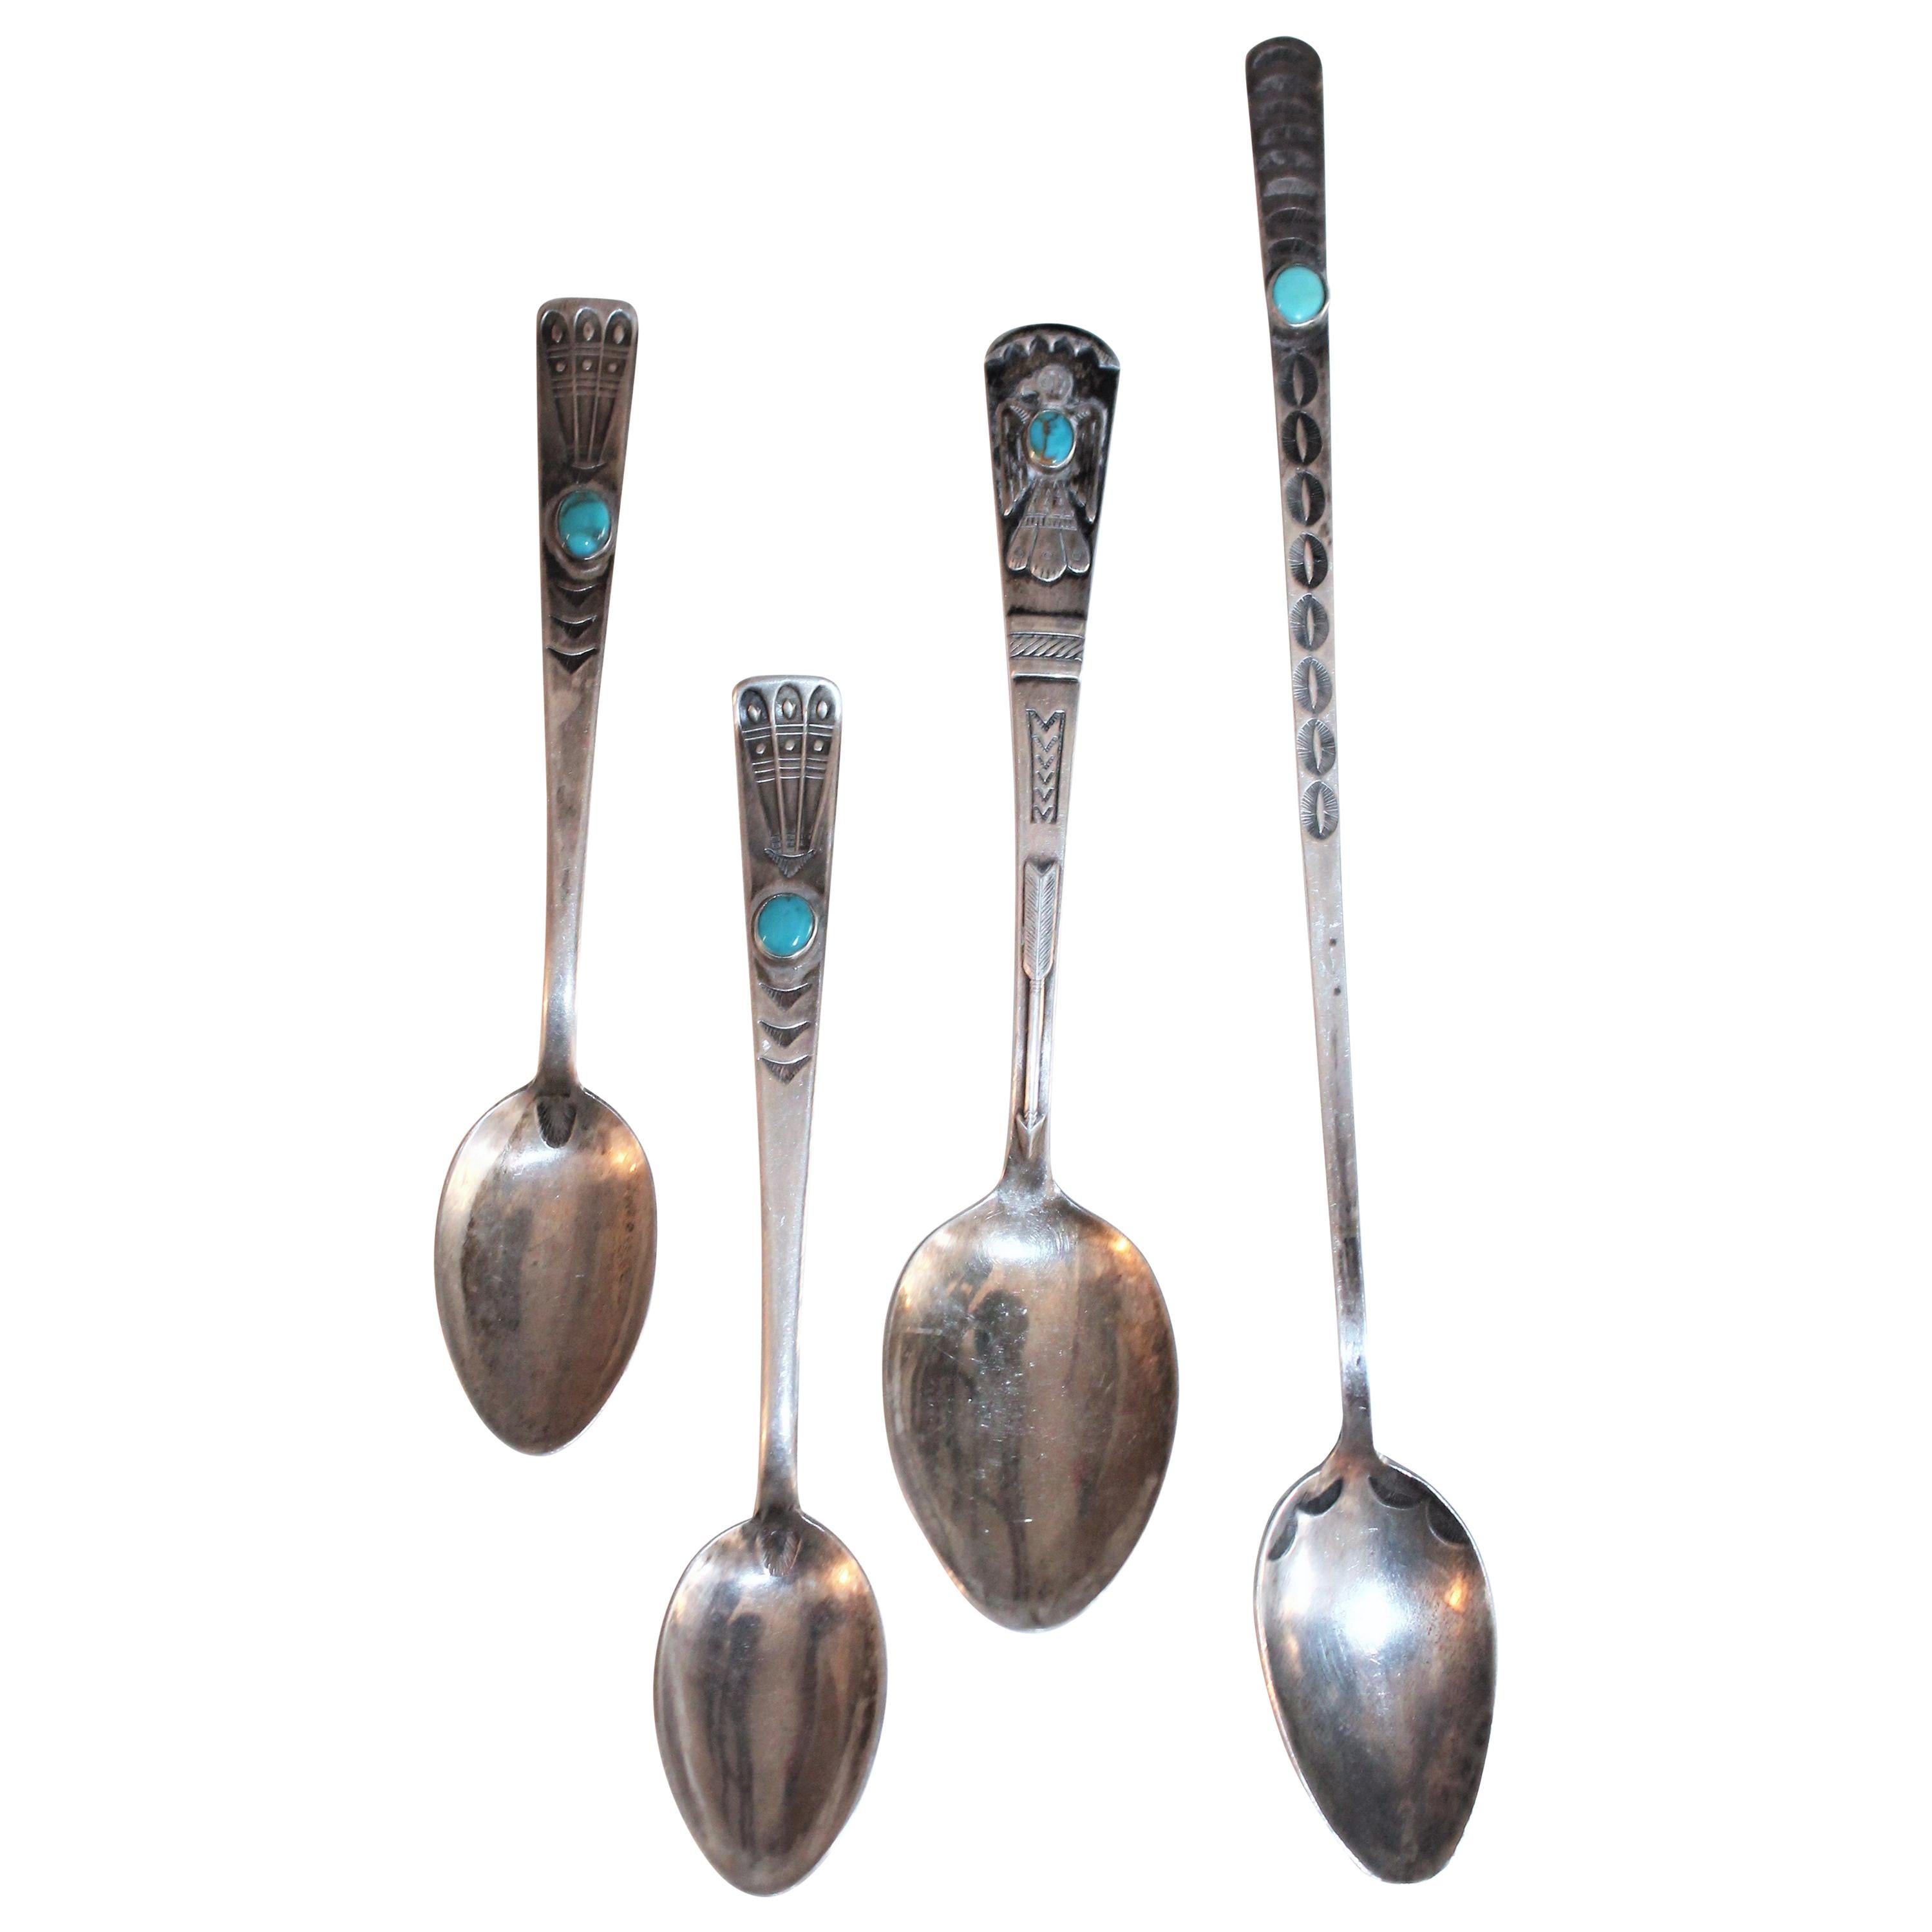 Navajo Indian Silver Spoons with Turquoise For Sale